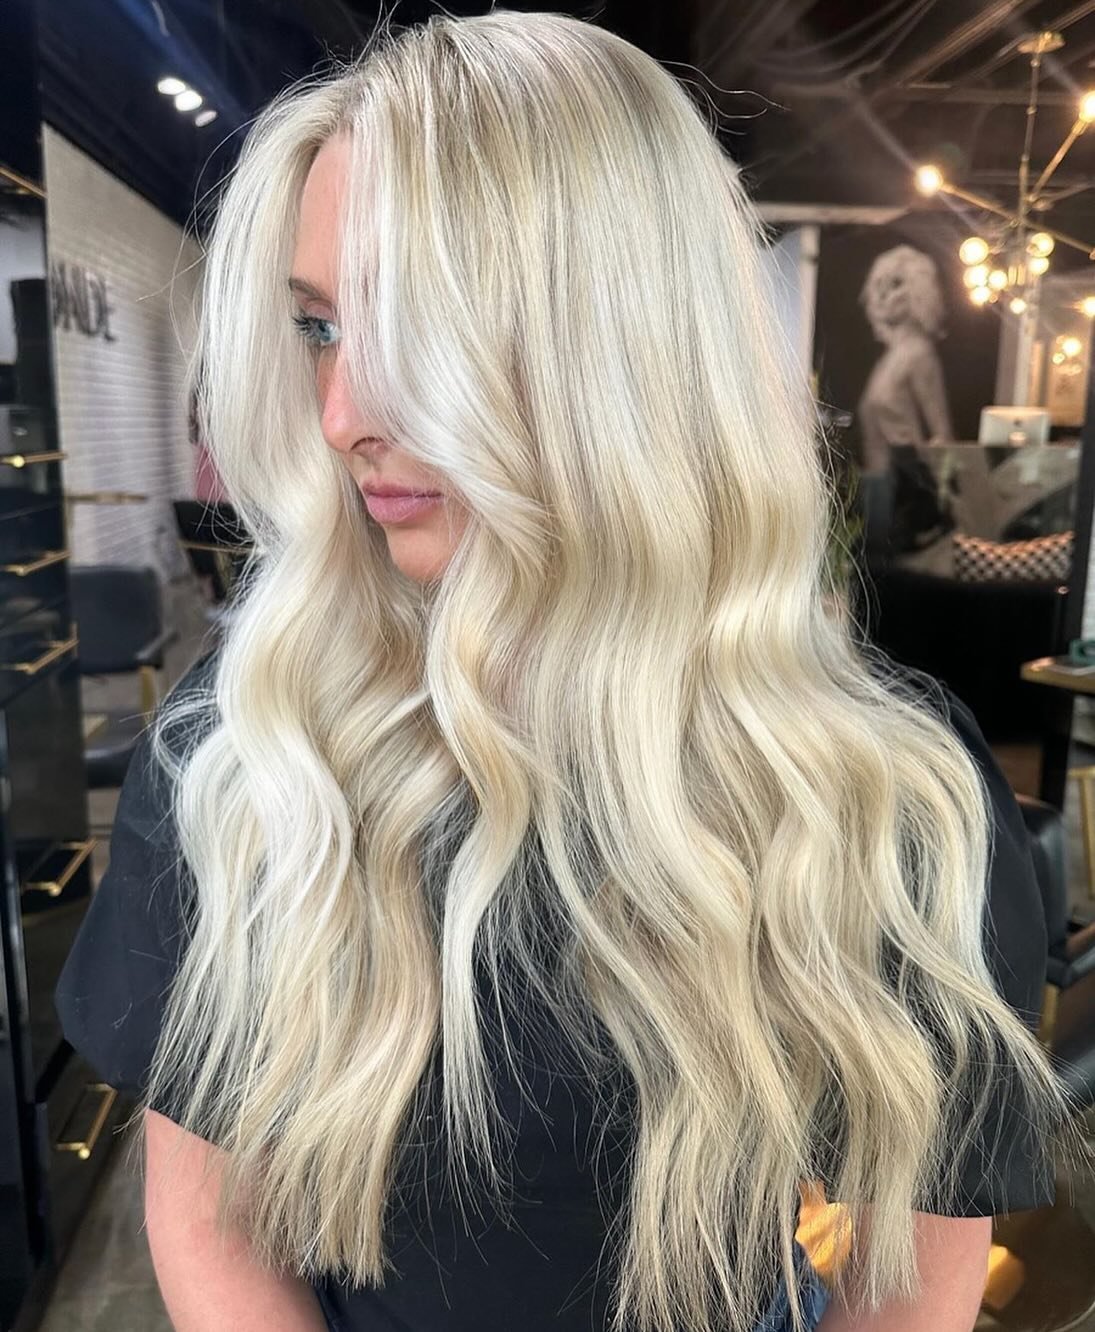 Down bad looking at this perf blonde by @hairbymariahhudson ❤️&zwj;🔥😍 link in bio to book! 

#nwahairstylist #hairstylist #blondefayetteville #blonde